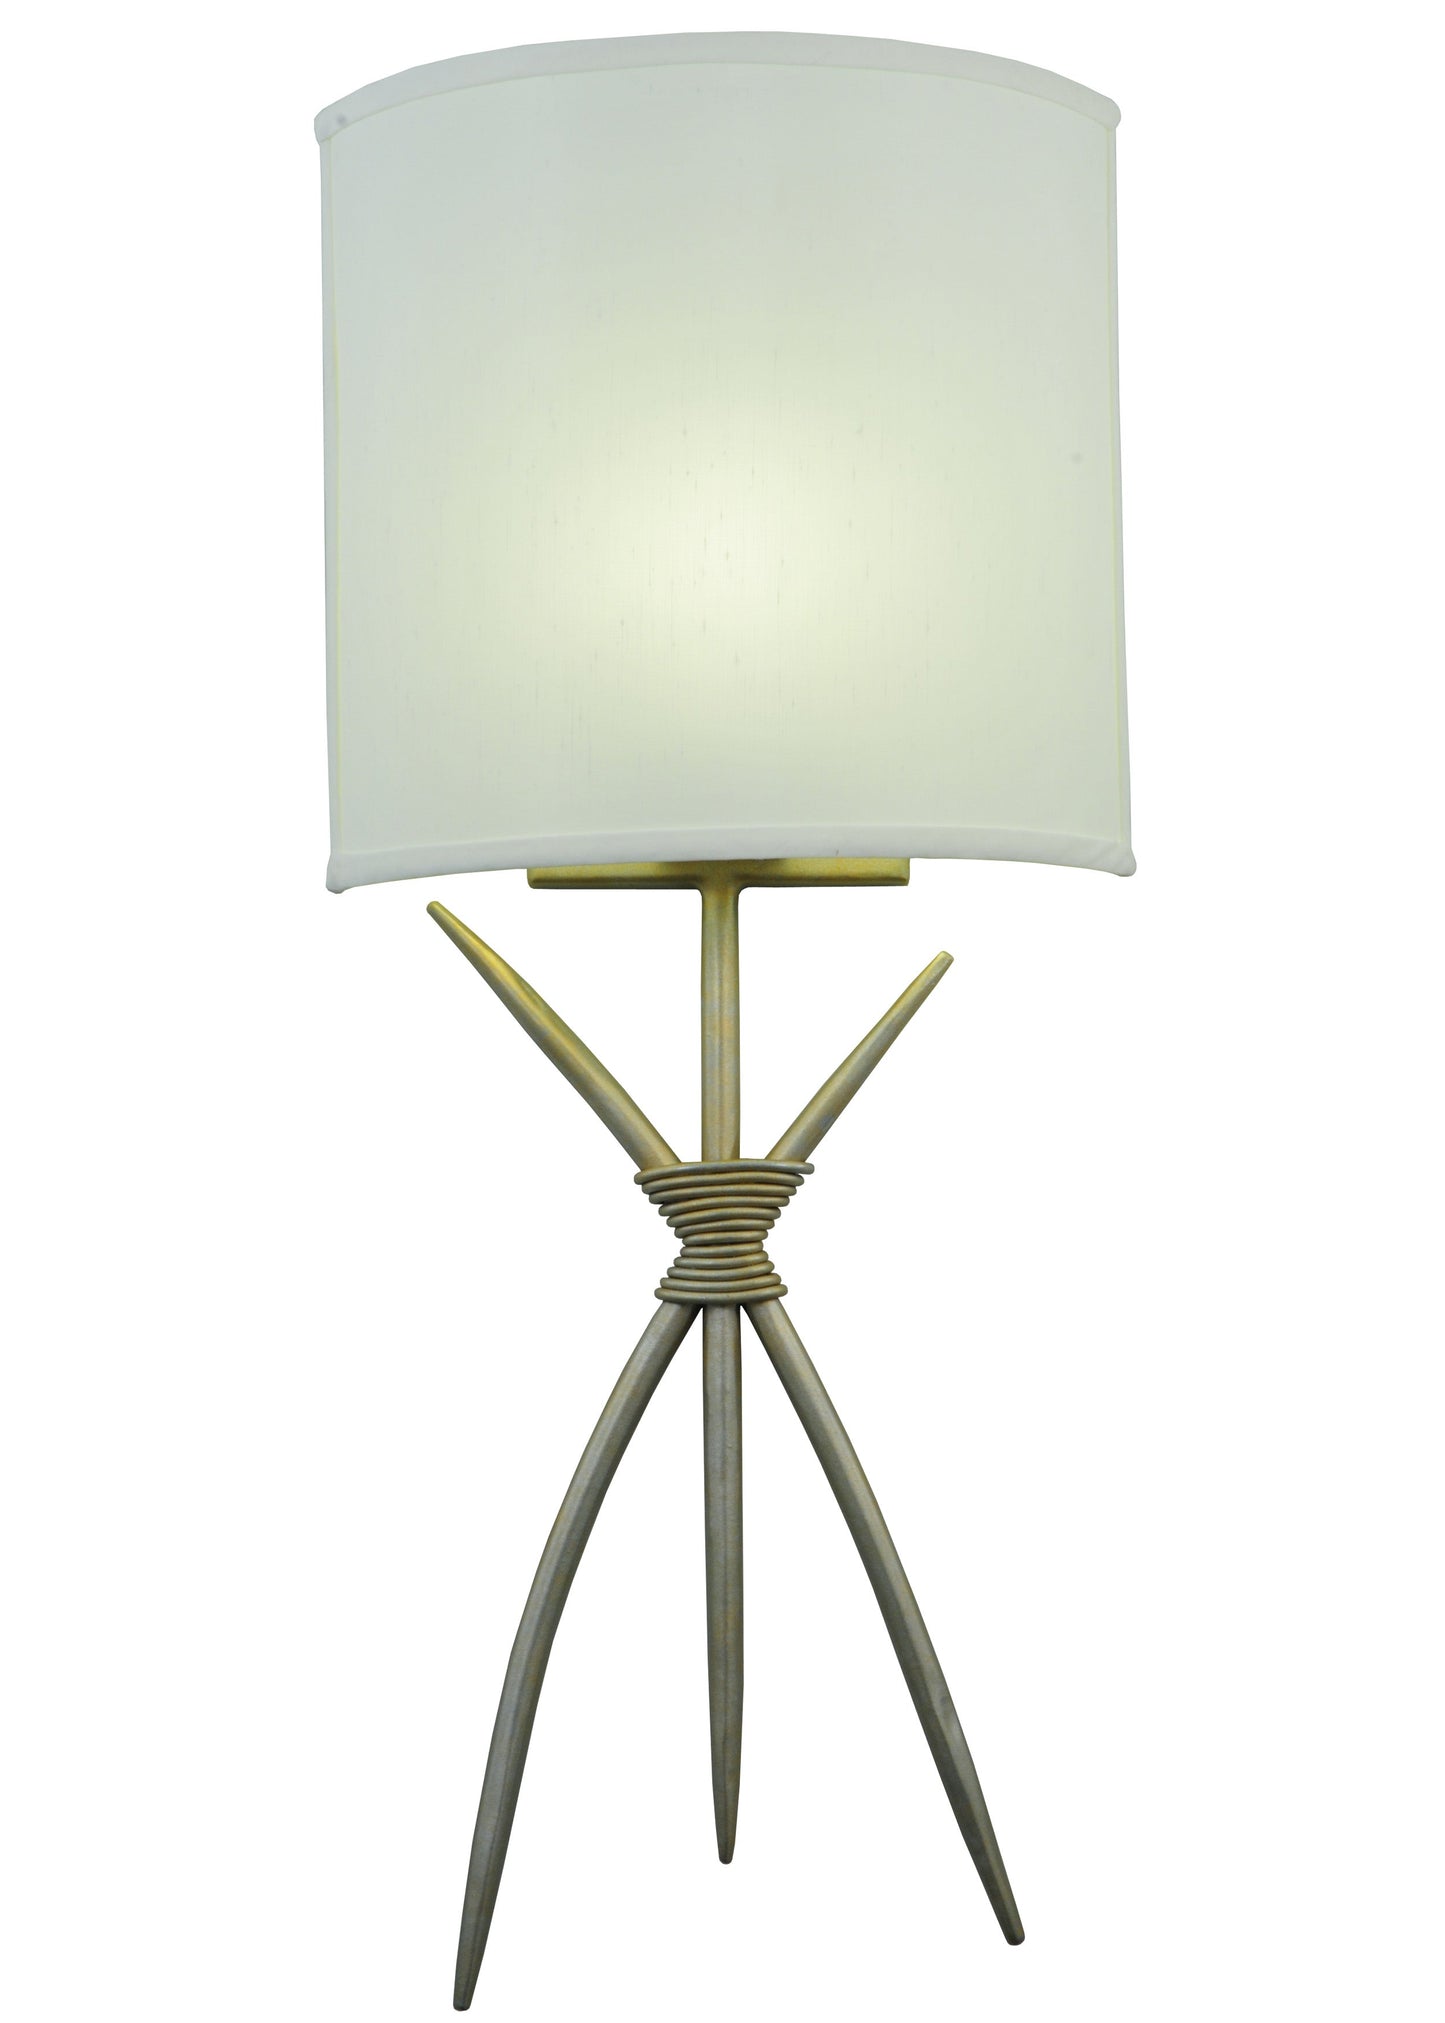 10.25" Sabre Wall Sconce by 2nd Ave Lighting